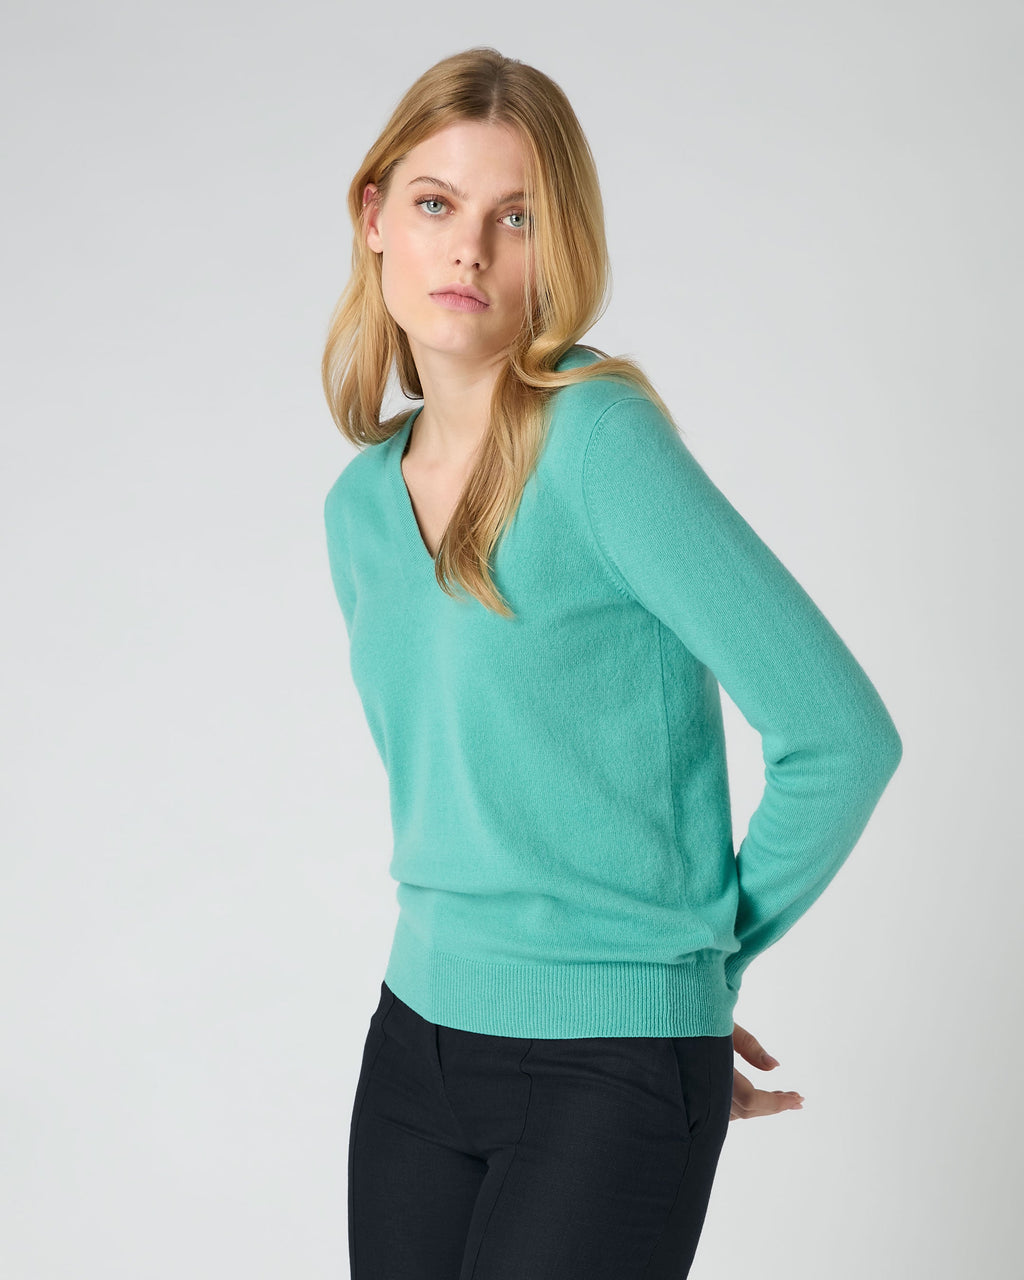 Women's V Neck Cashmere Sweaters, Free Delivery